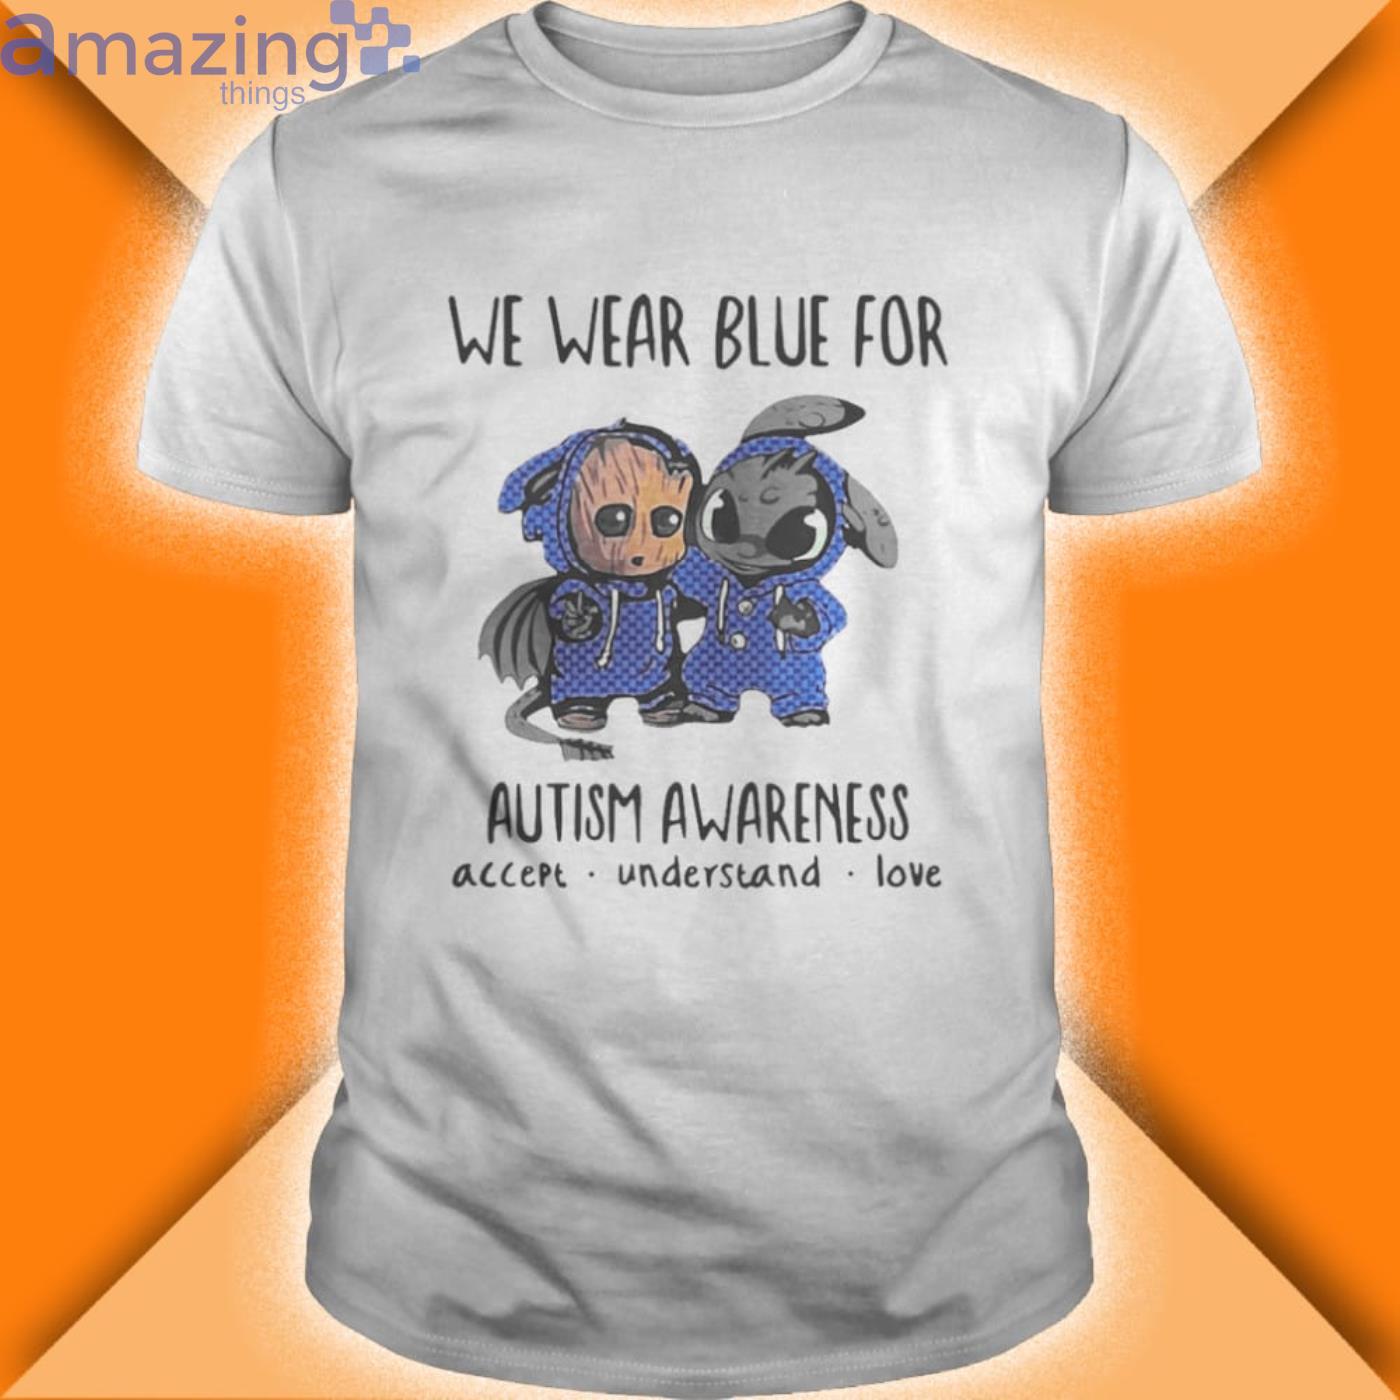 Baby Groot And Toothless We Wear Blue For Autism Awareness Shirt Product Photo 1